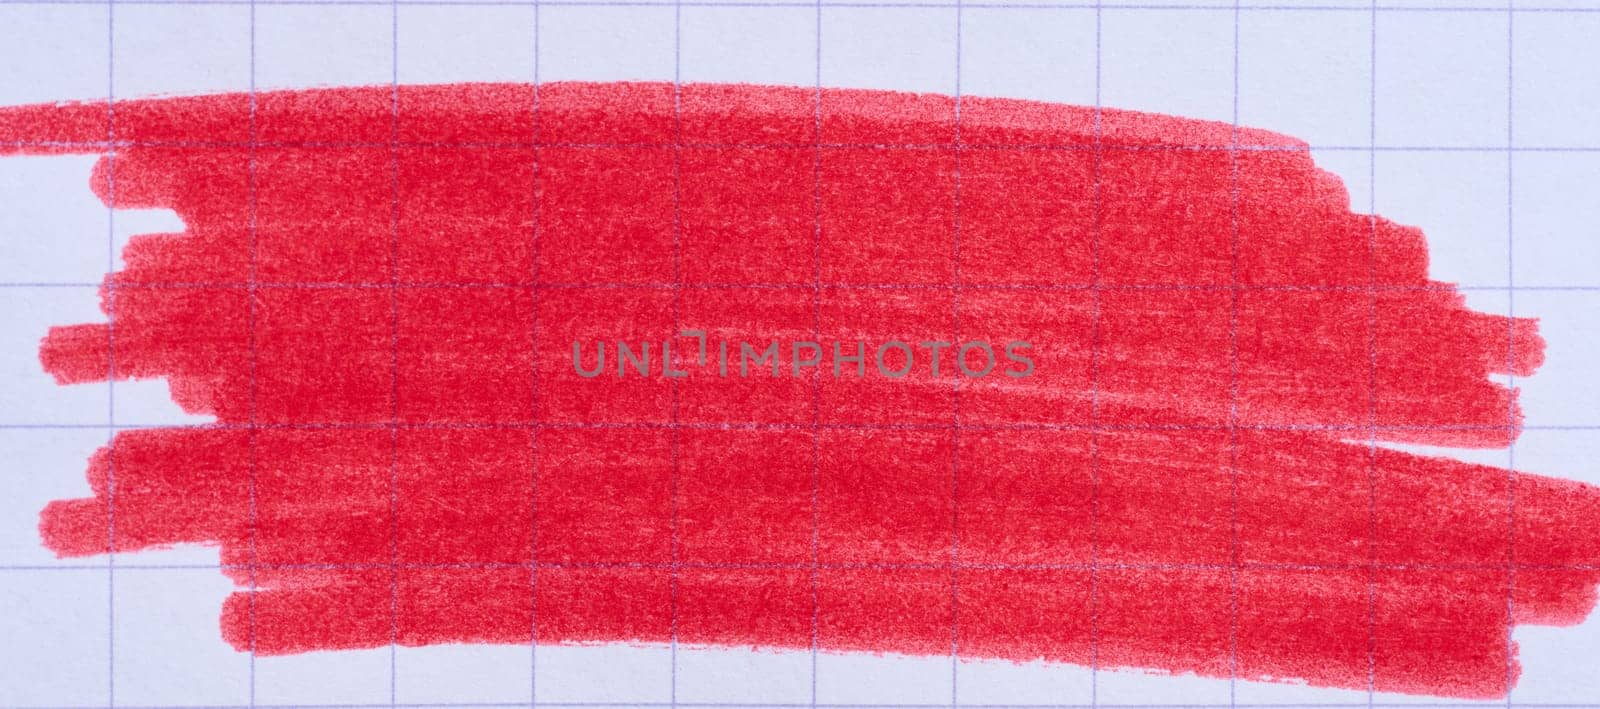 Hatching with a red felt-tip pen on a sheet of checkered paper